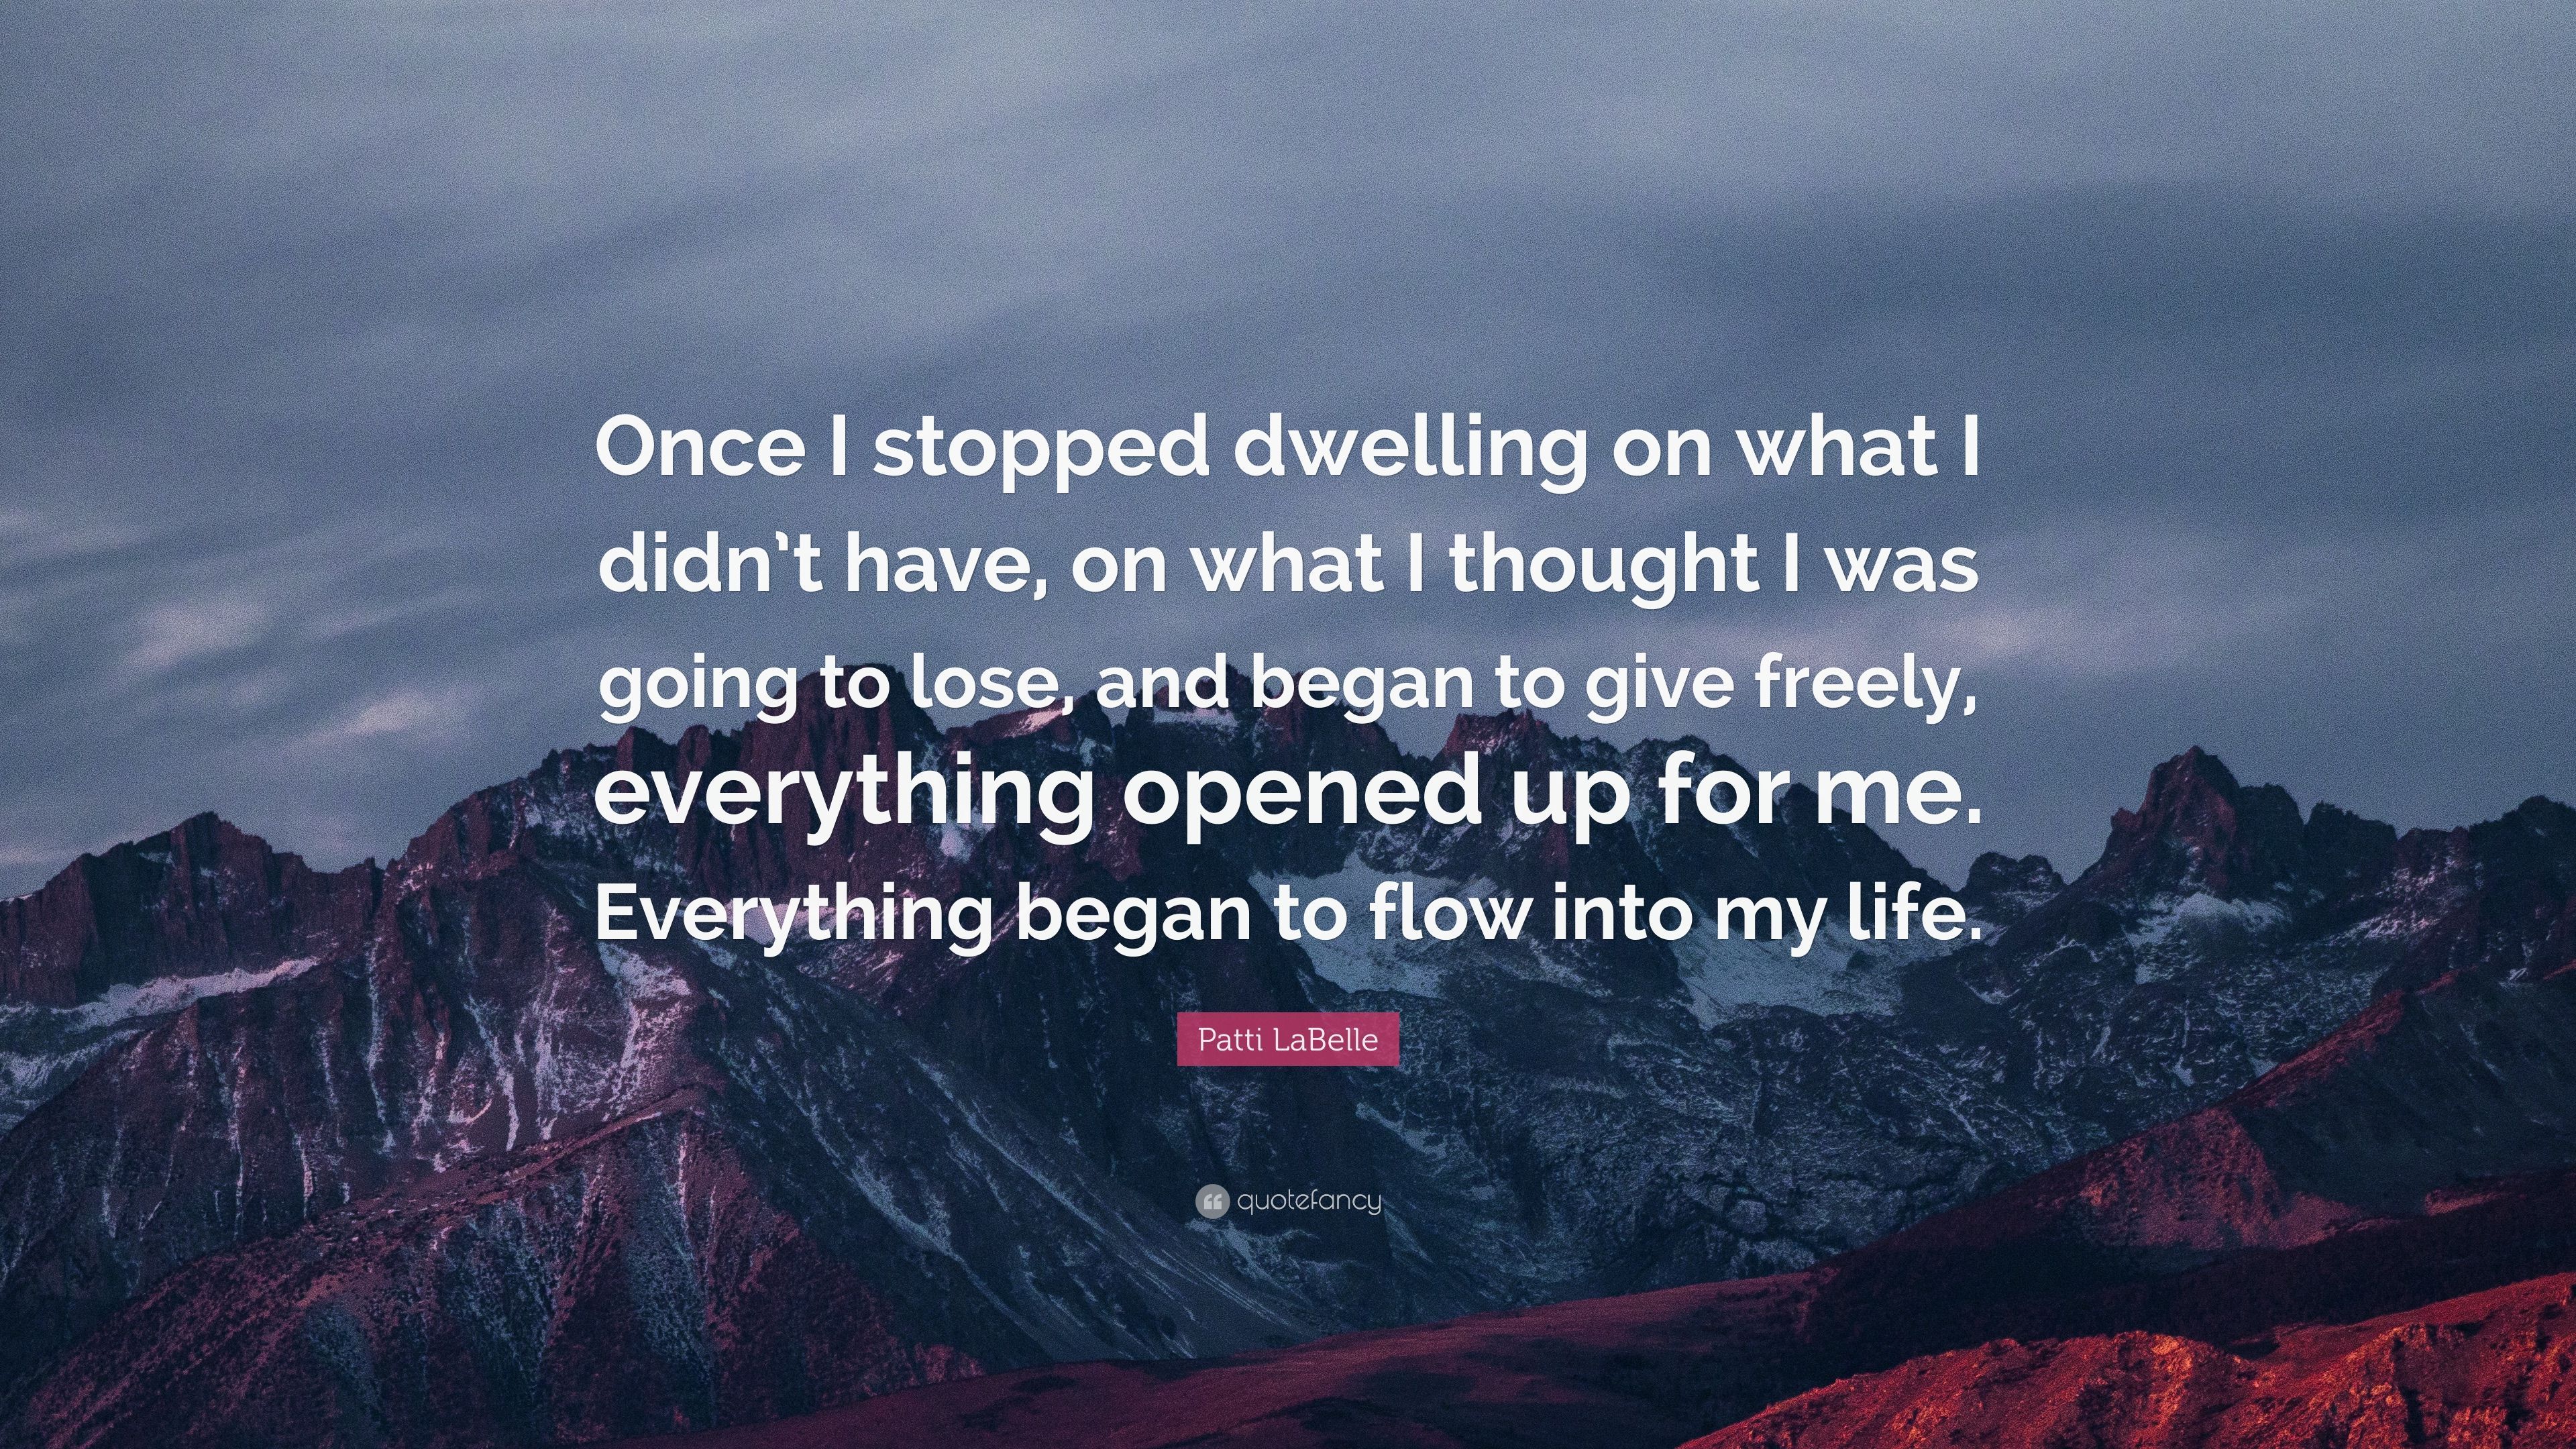 Patti LaBelle Quote: “Once I stopped dwelling on what I didn't have